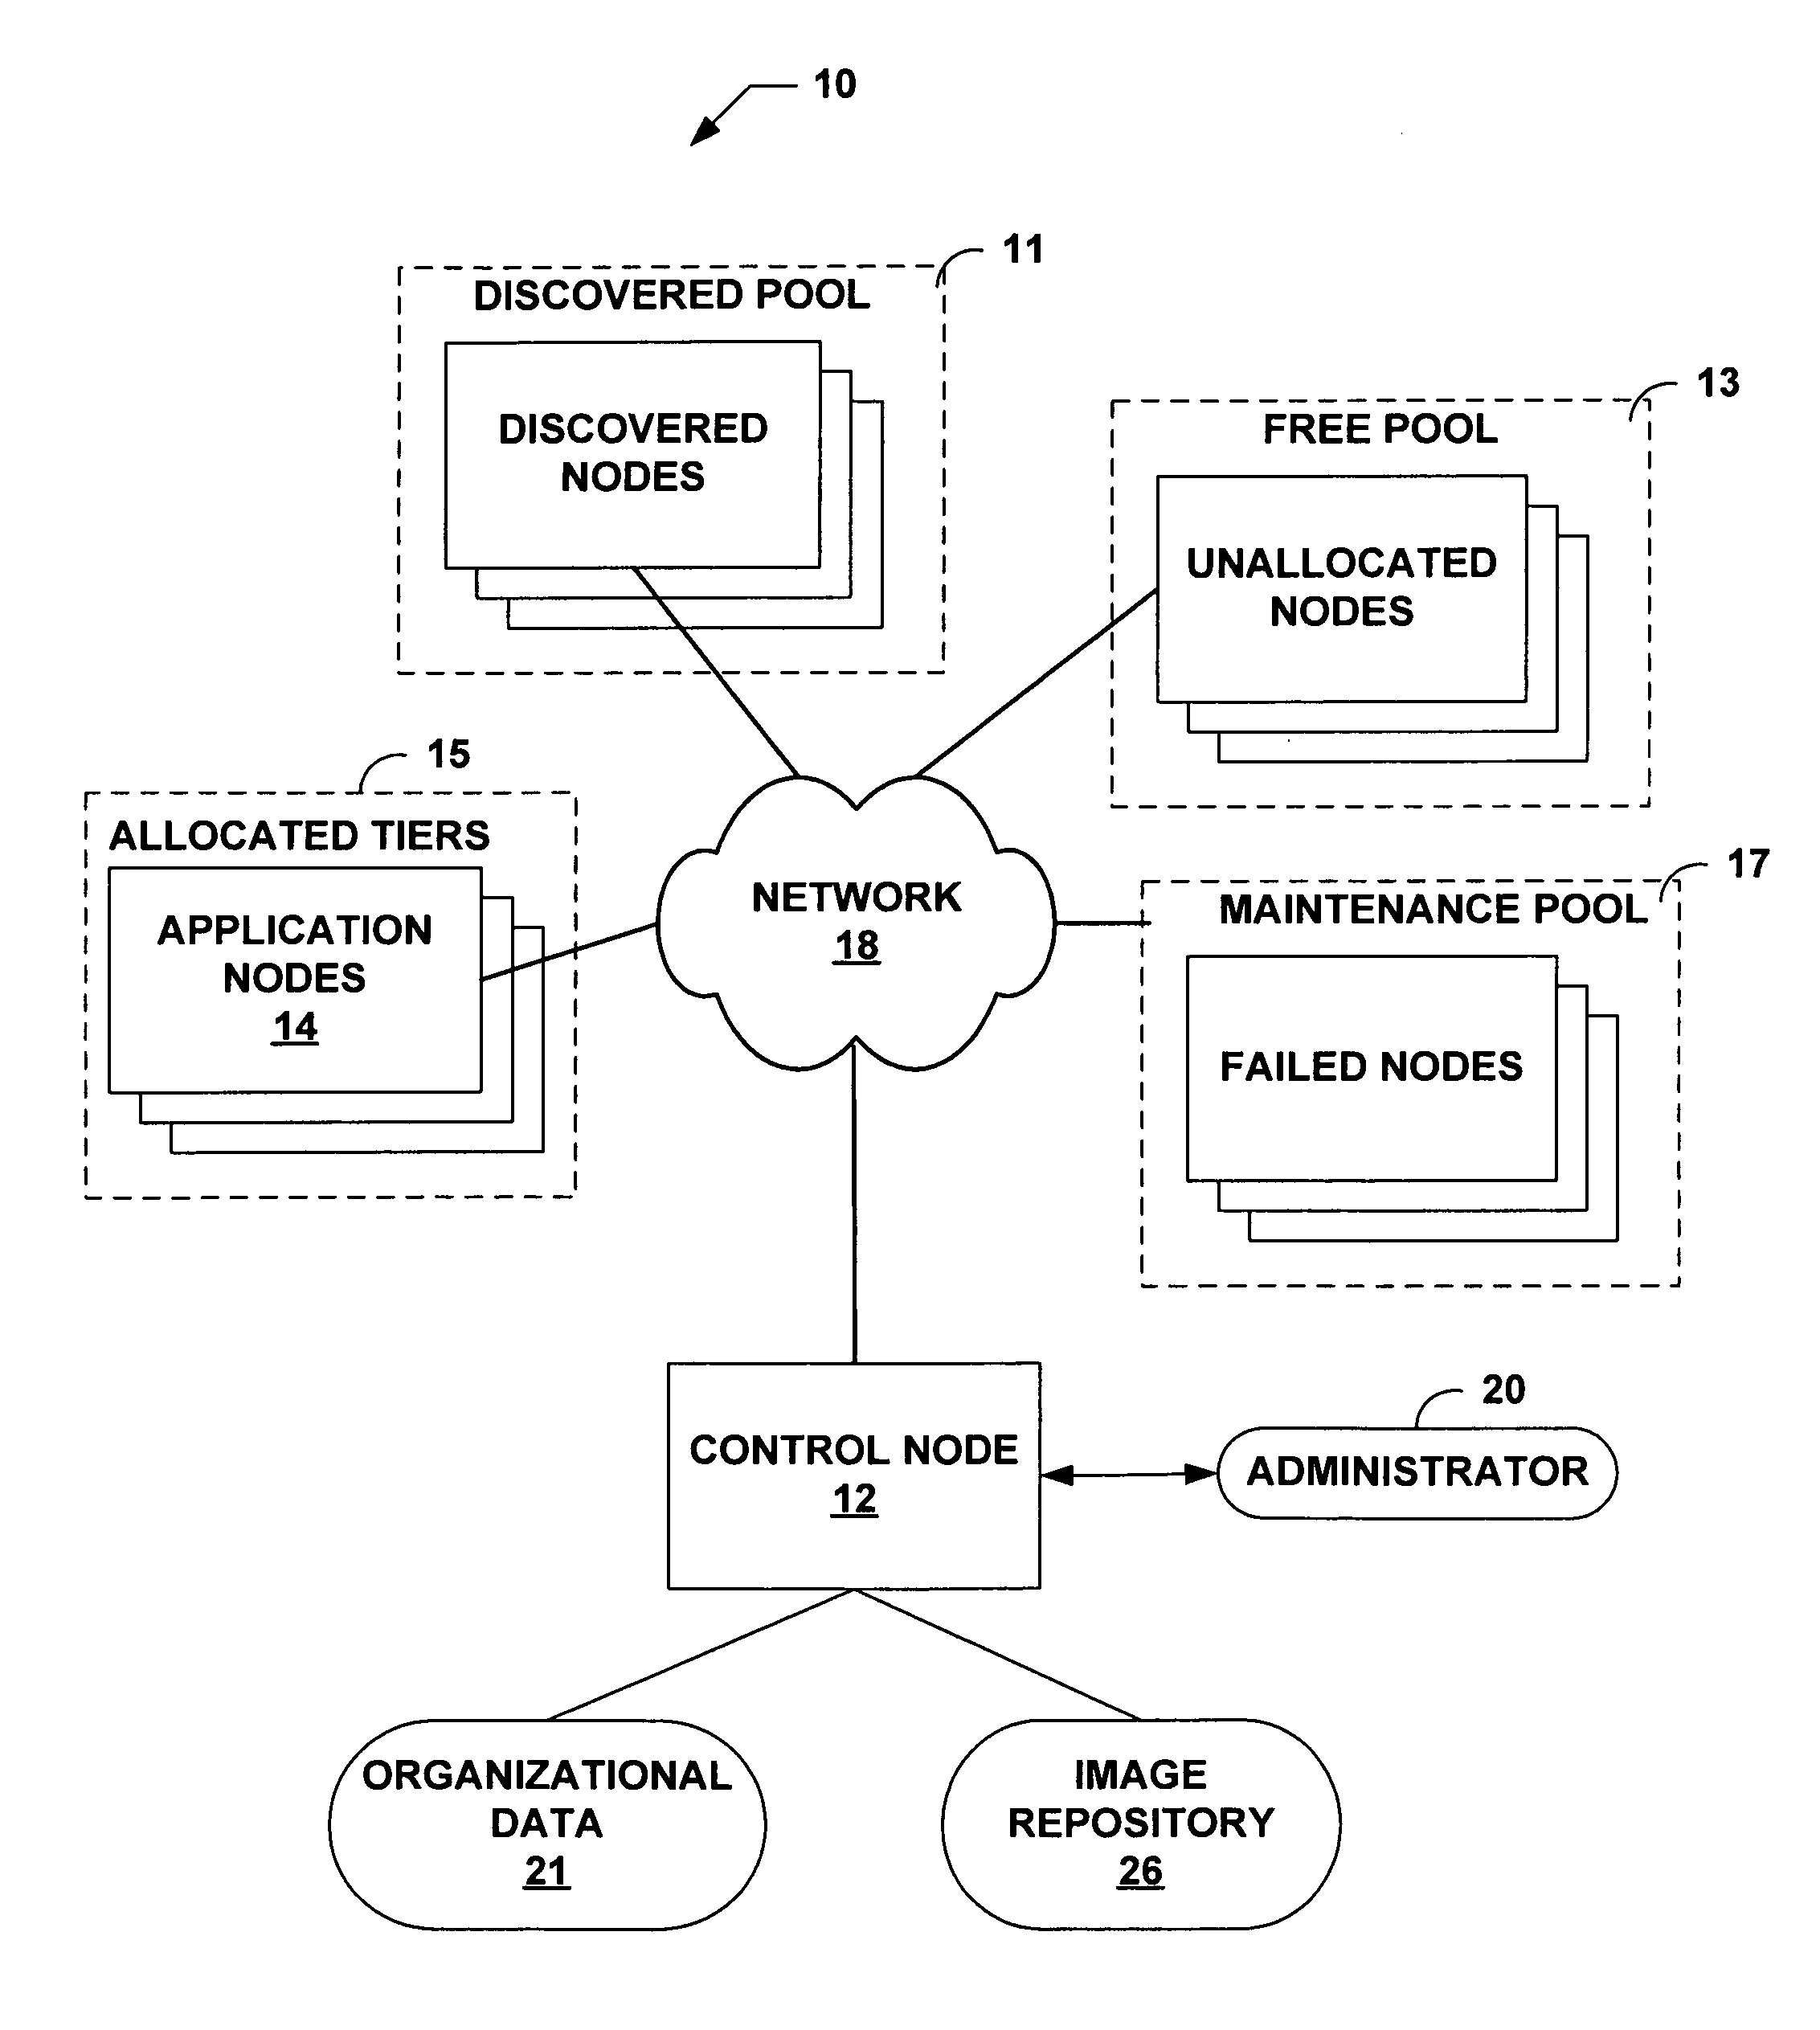 Automated deployment and configuration of applications in an autonomically controlled distributed computing system